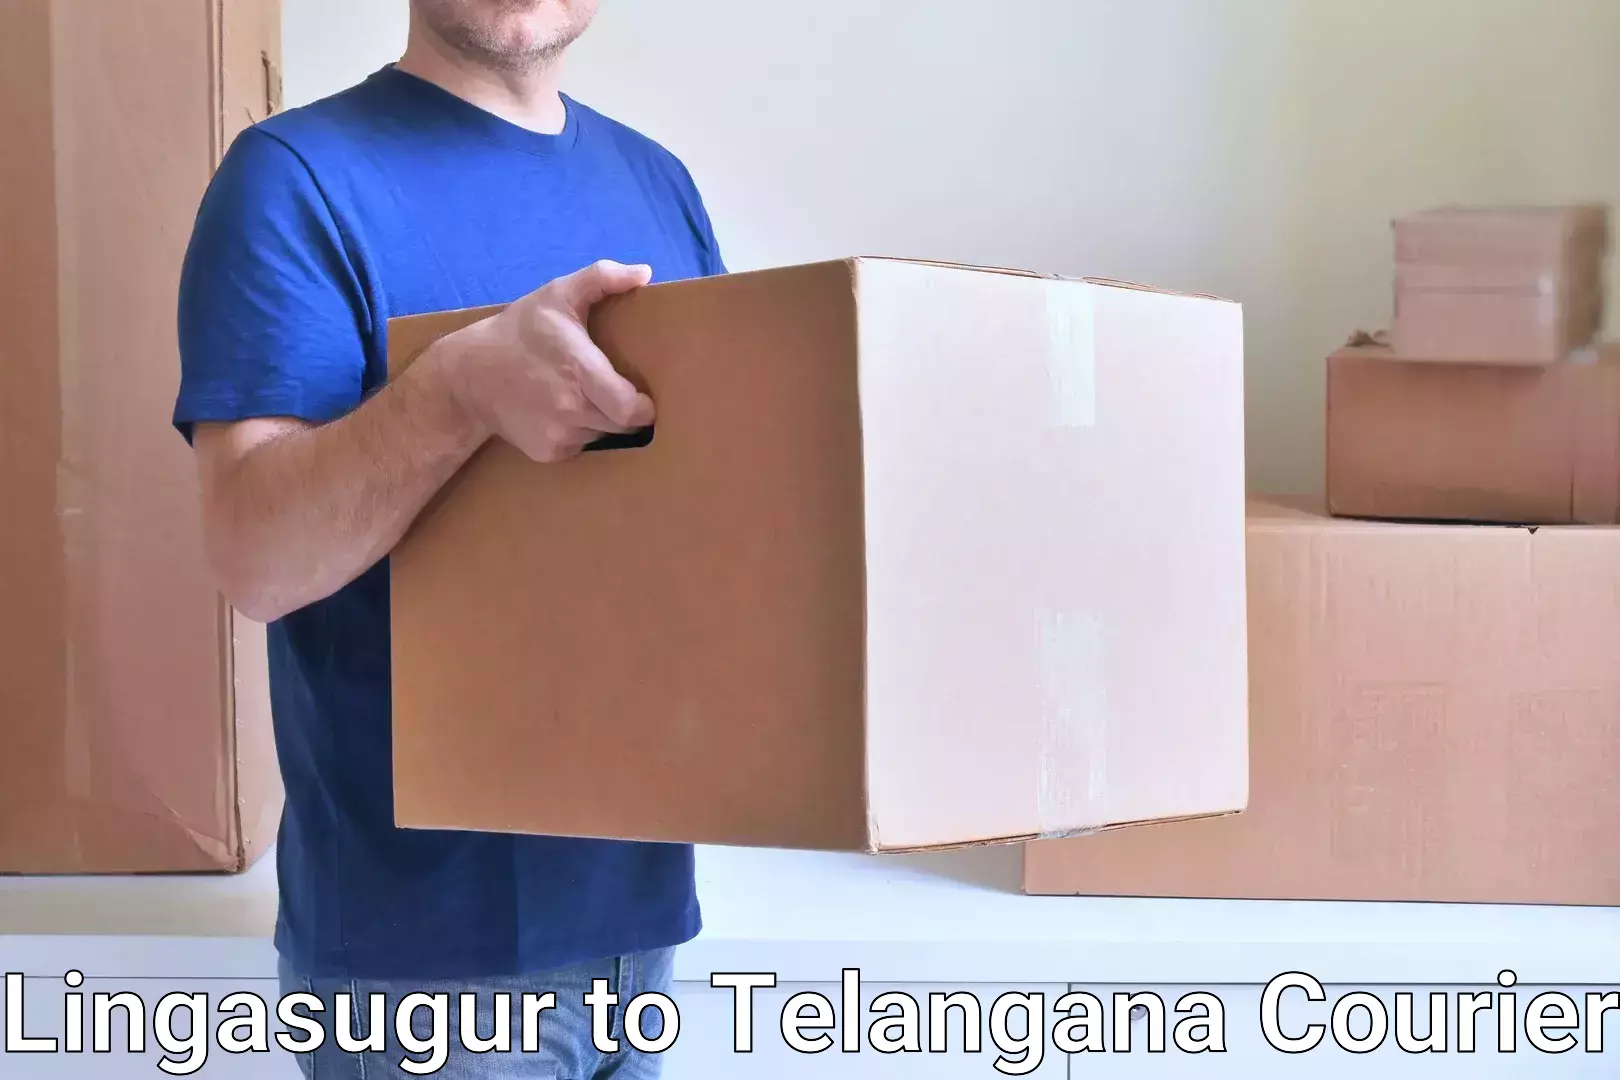 Residential courier service Lingasugur to Telangana